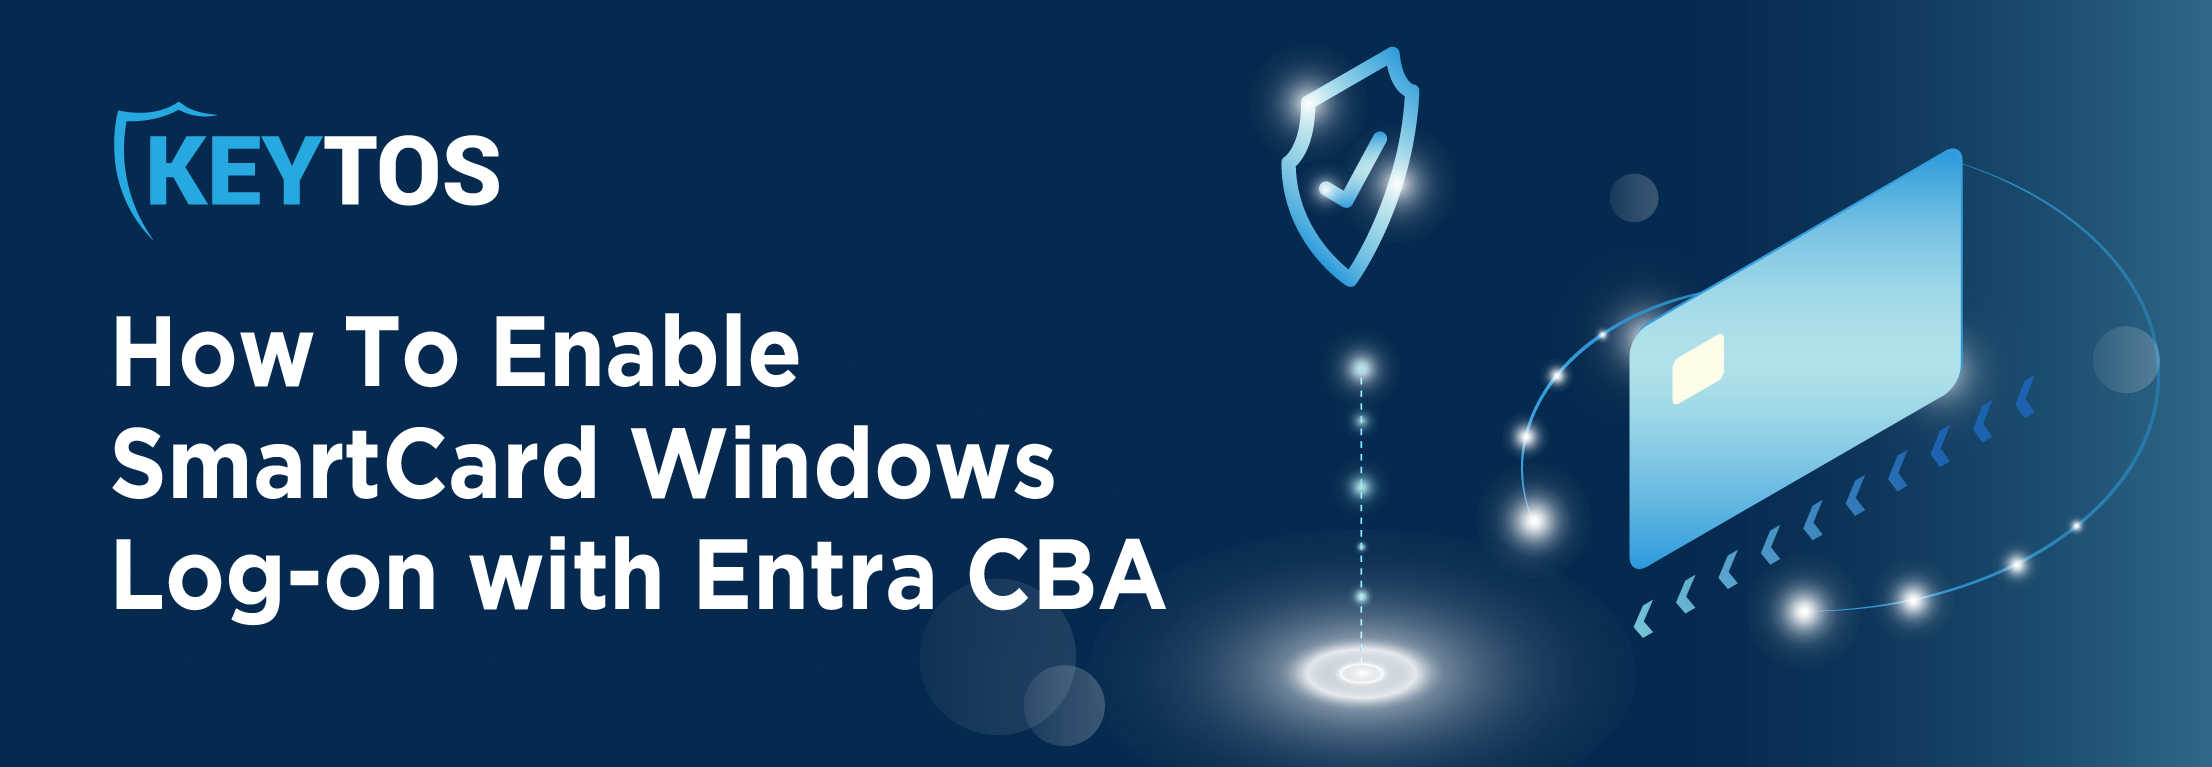 How to enable smartcard windows log-on with Entra CBA and troubleshoot common Entra ID issues